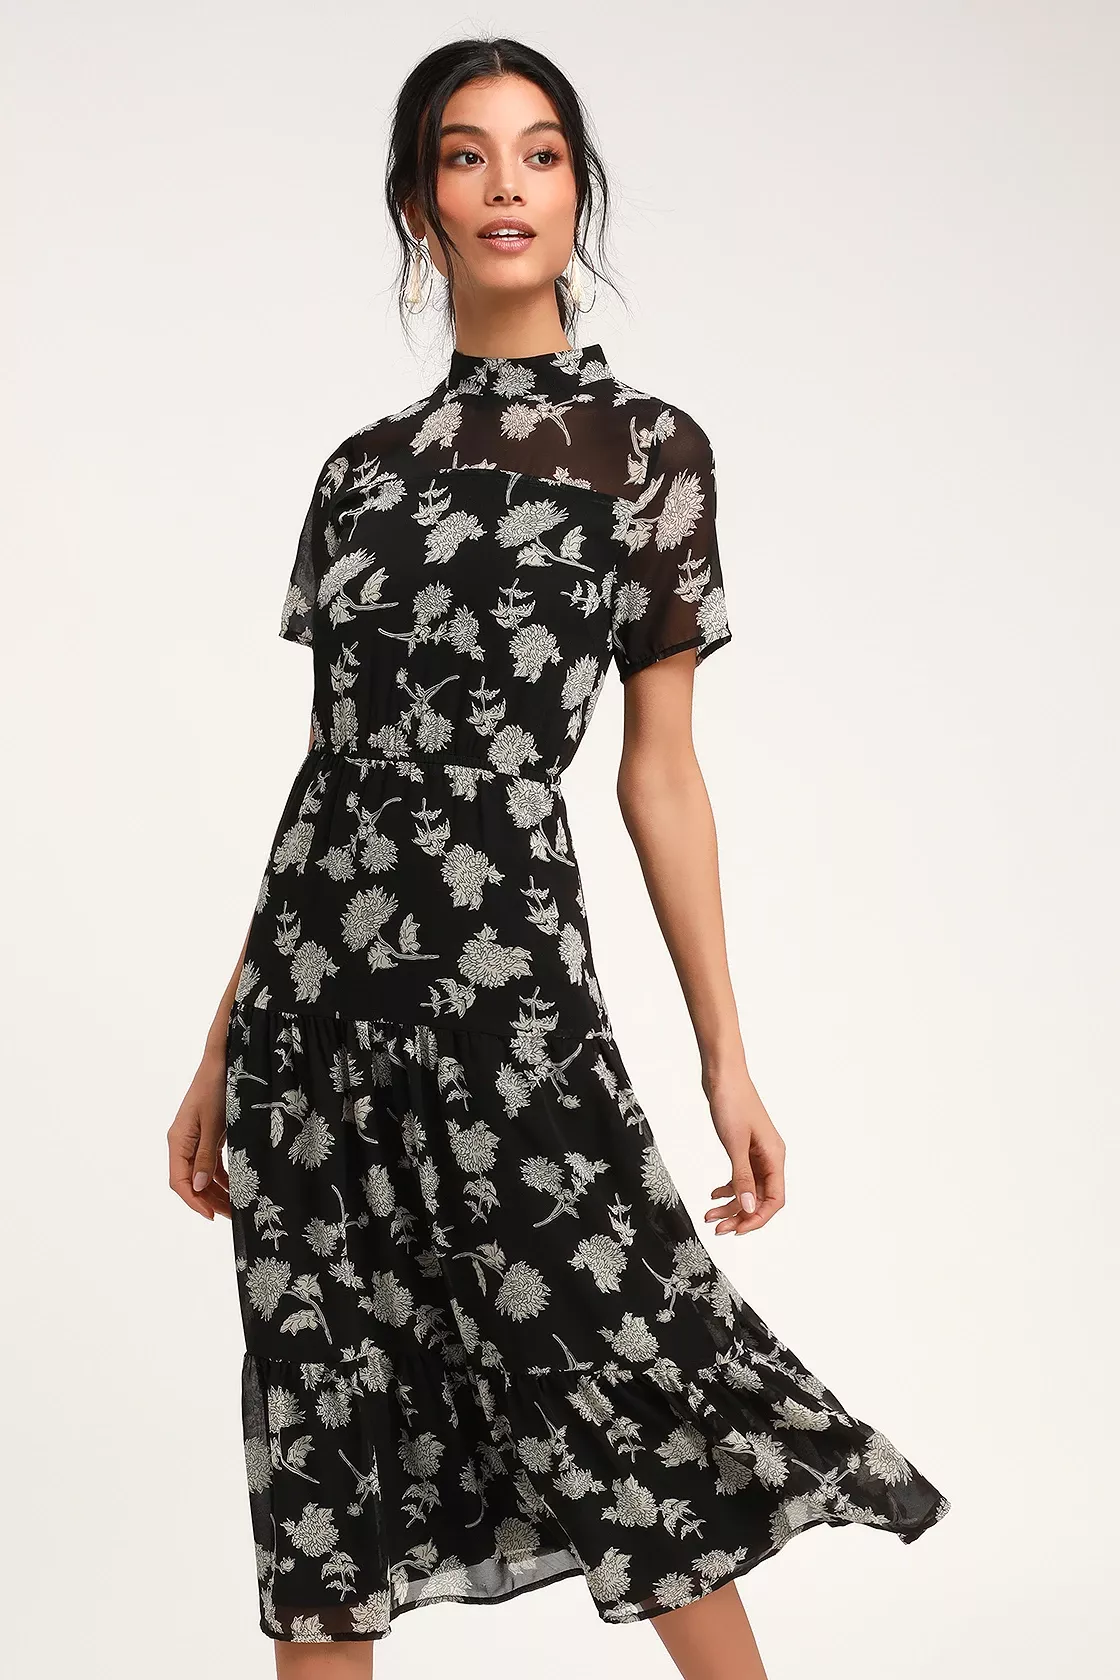 Cascading Crush Black Floral Print Tiered Bustier Midi Dress